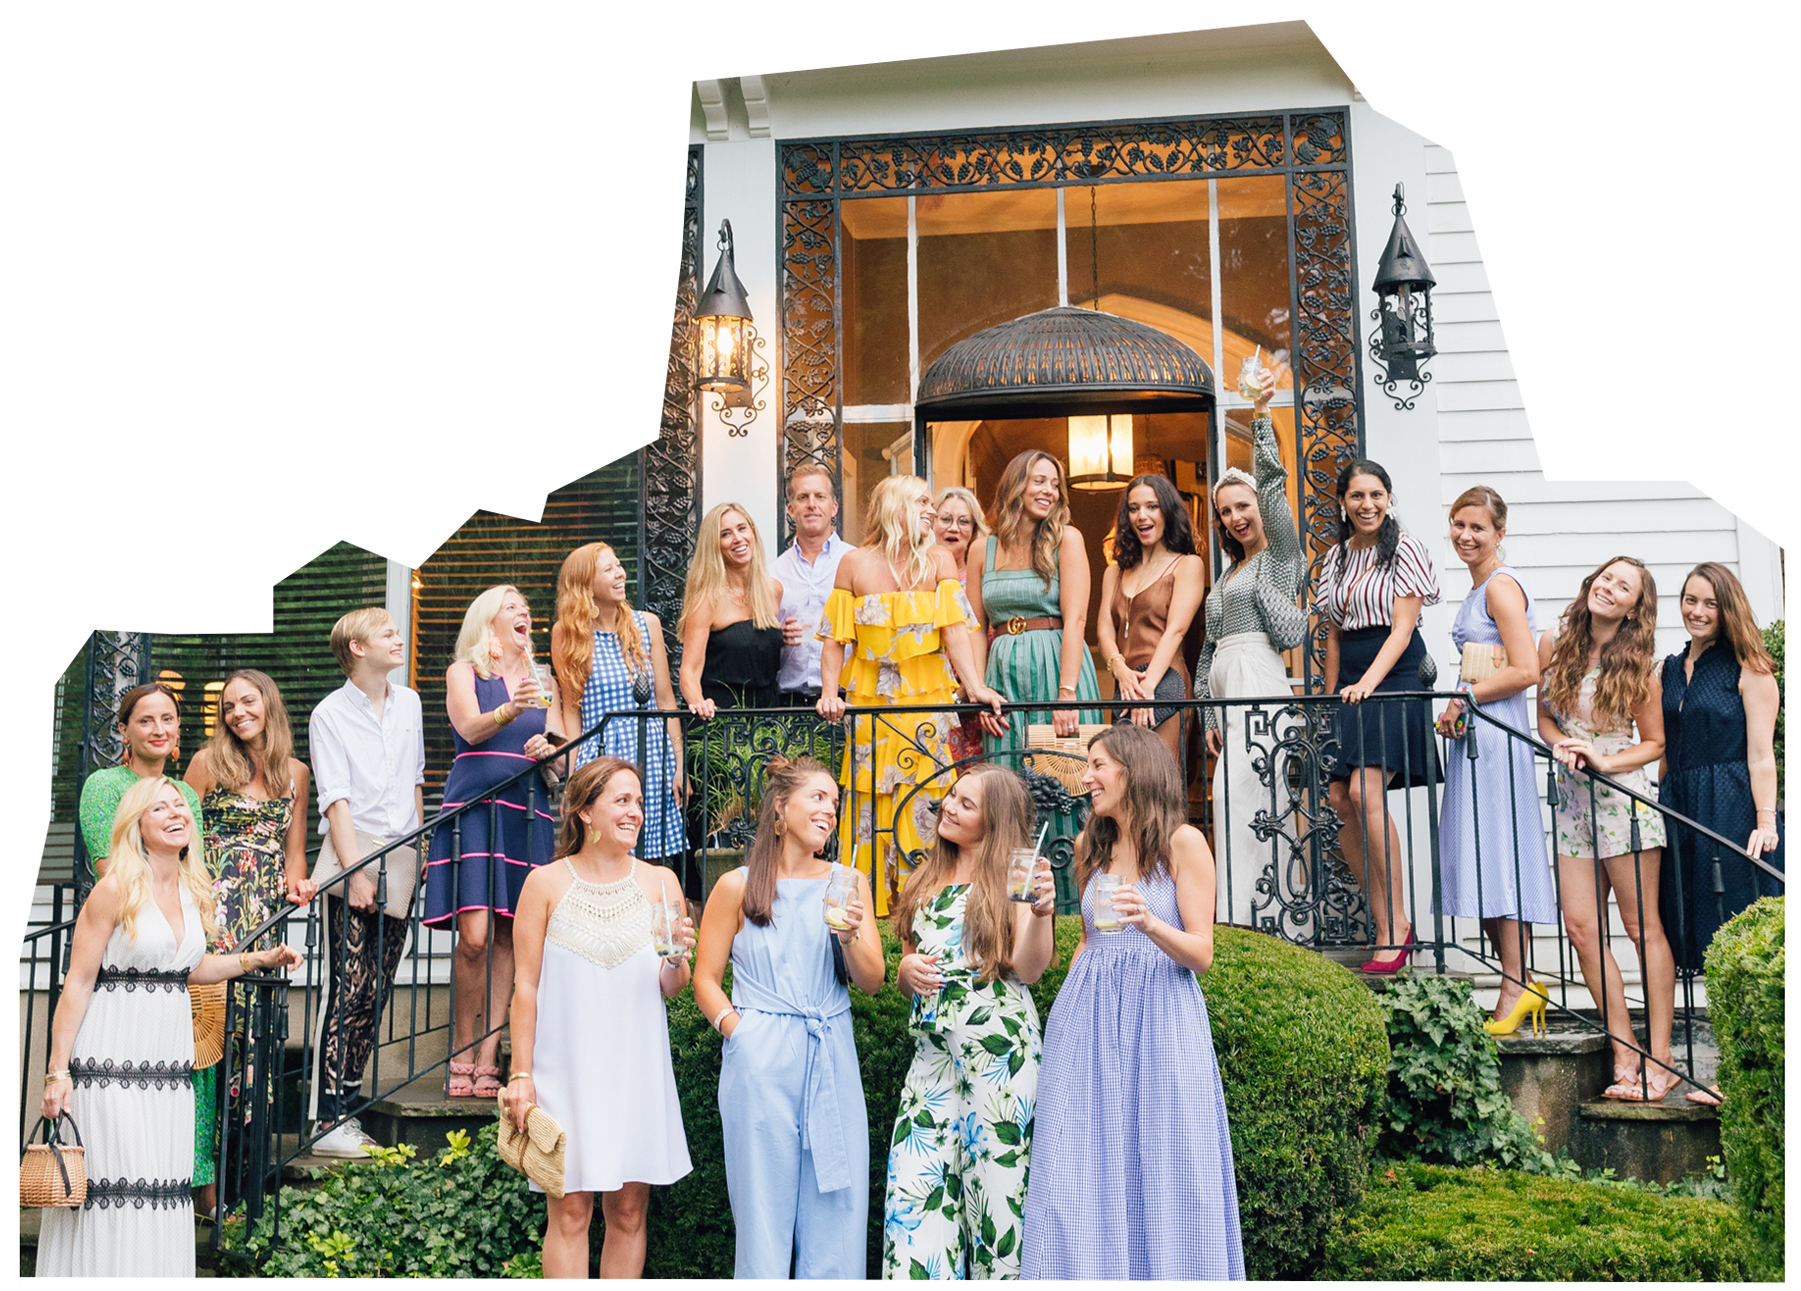 A Summer Soirée With My Favorite Connecticut Bloggers #summer #fashion #style #bloggers #bffs #connecticut #westchester #diorbag #outfitinspiration #groupshot